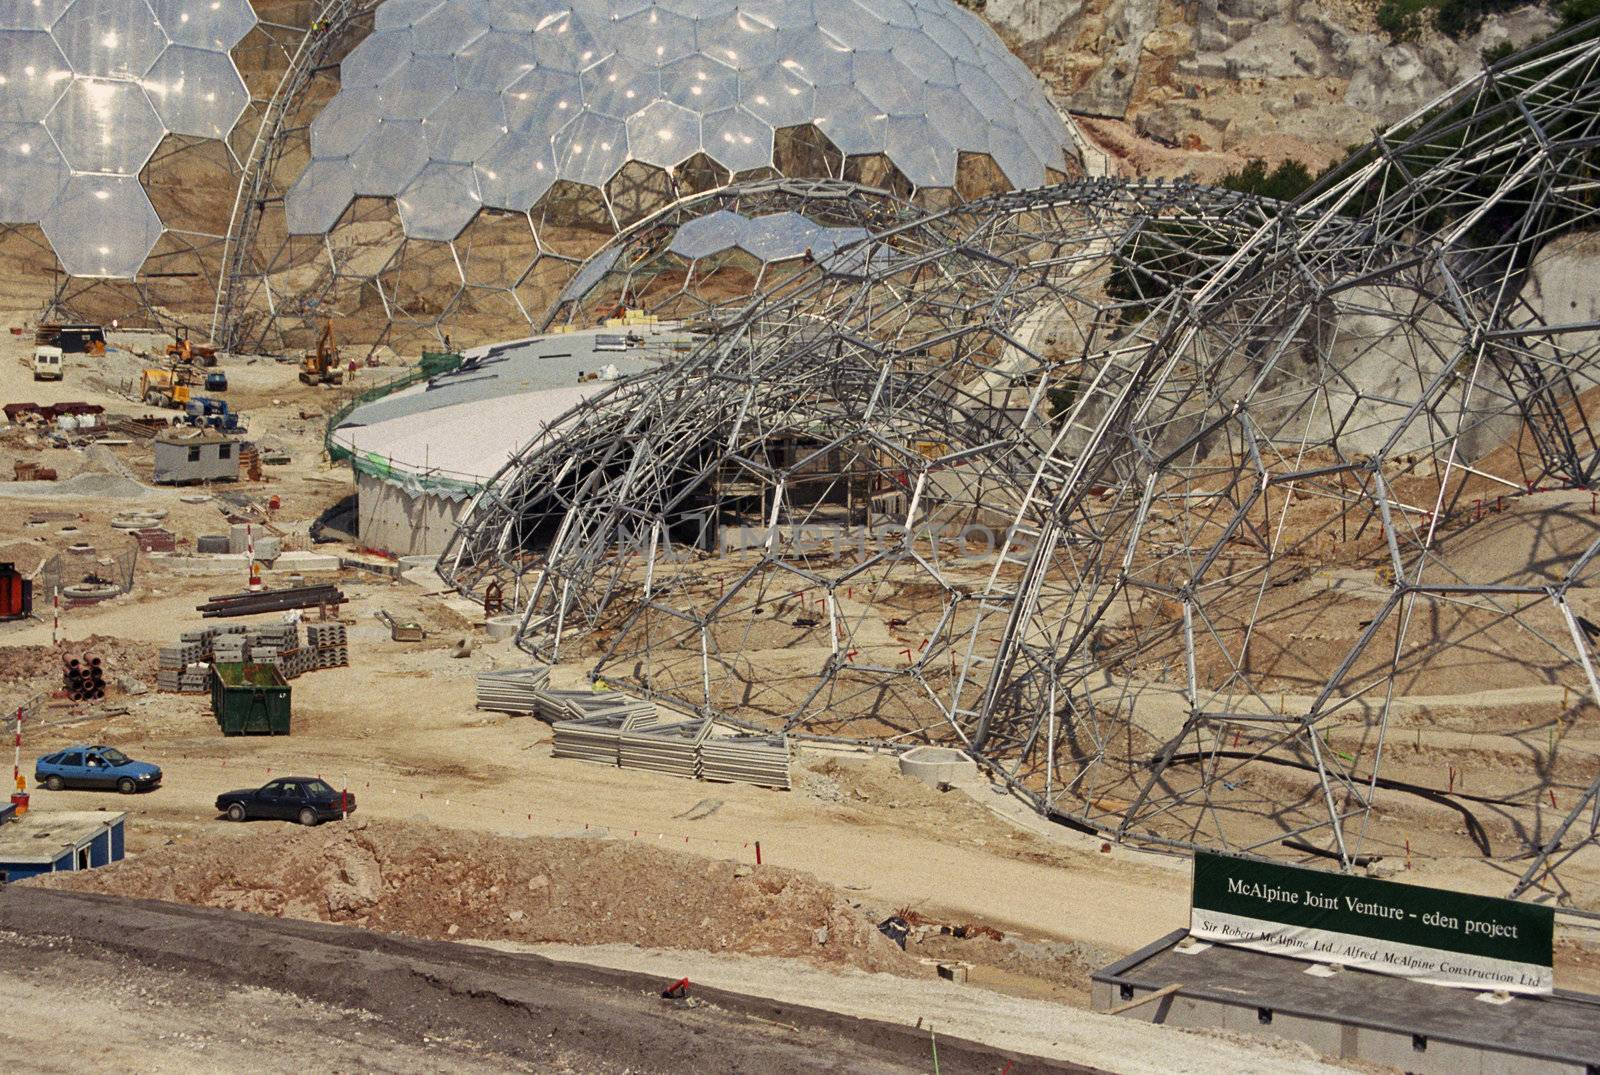 Partially completed domes or "biomes" at the Eden Project in Cornwall